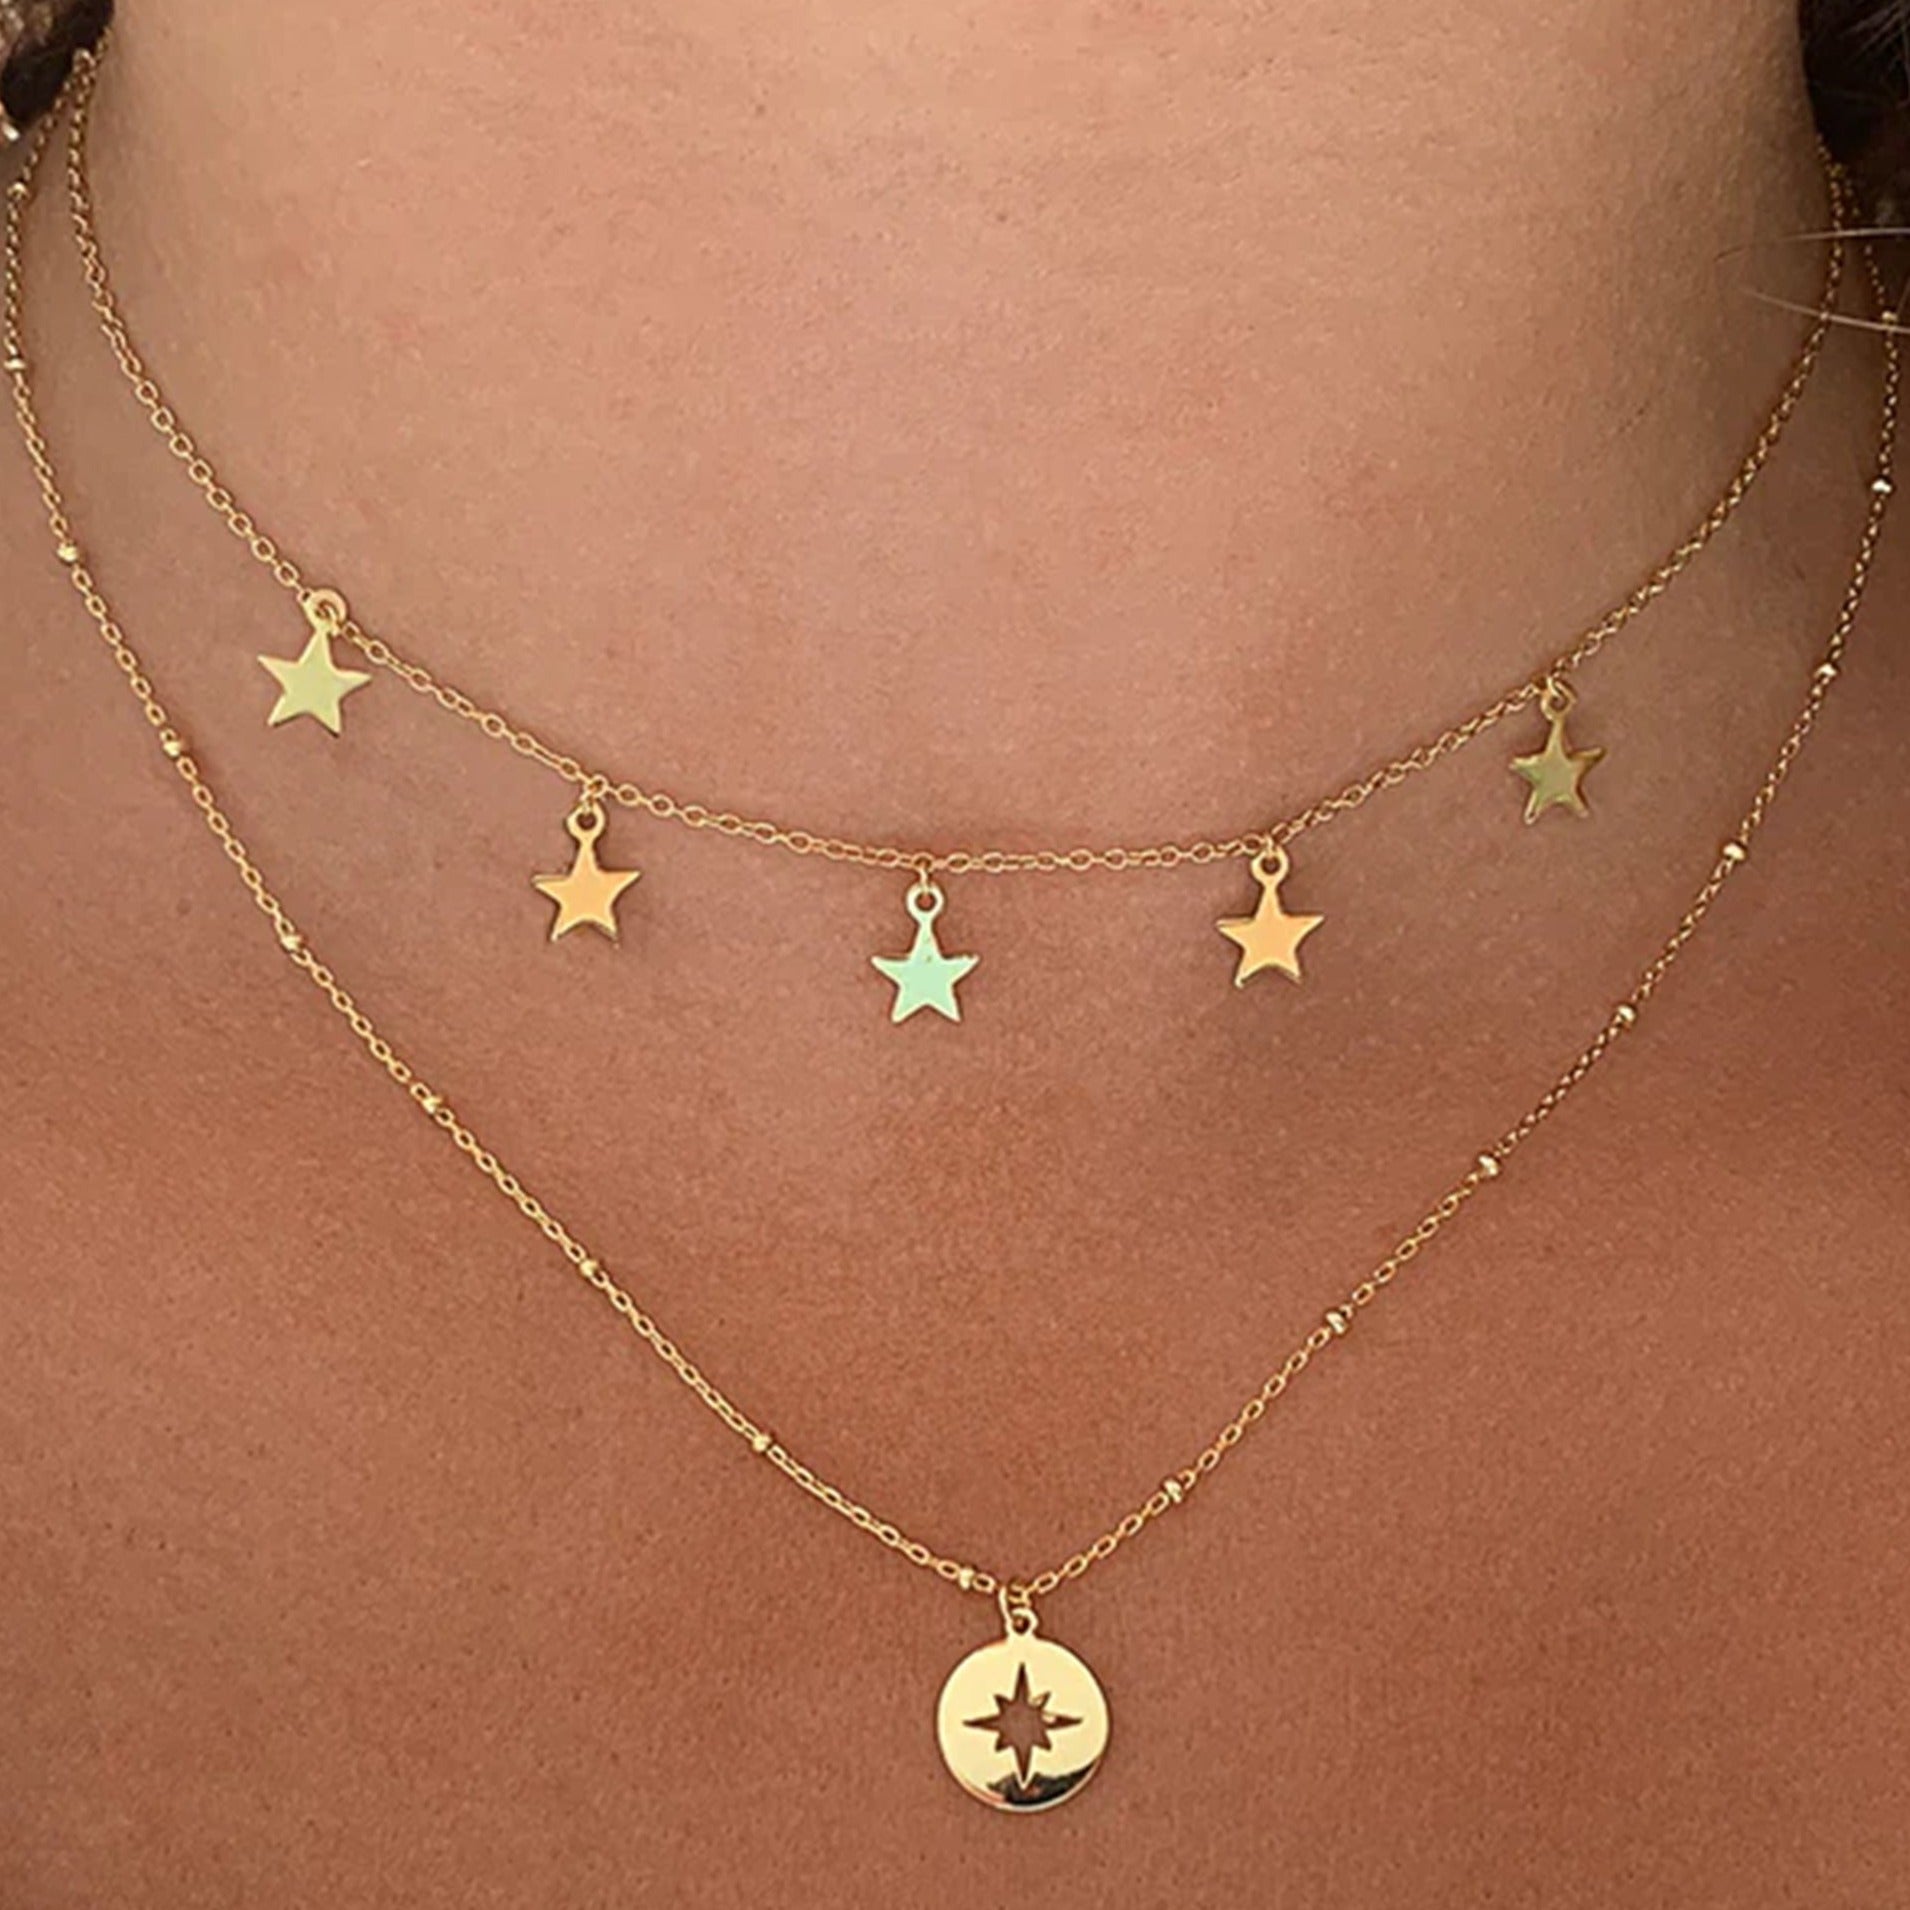 Asti Gold Star Charm Necklace